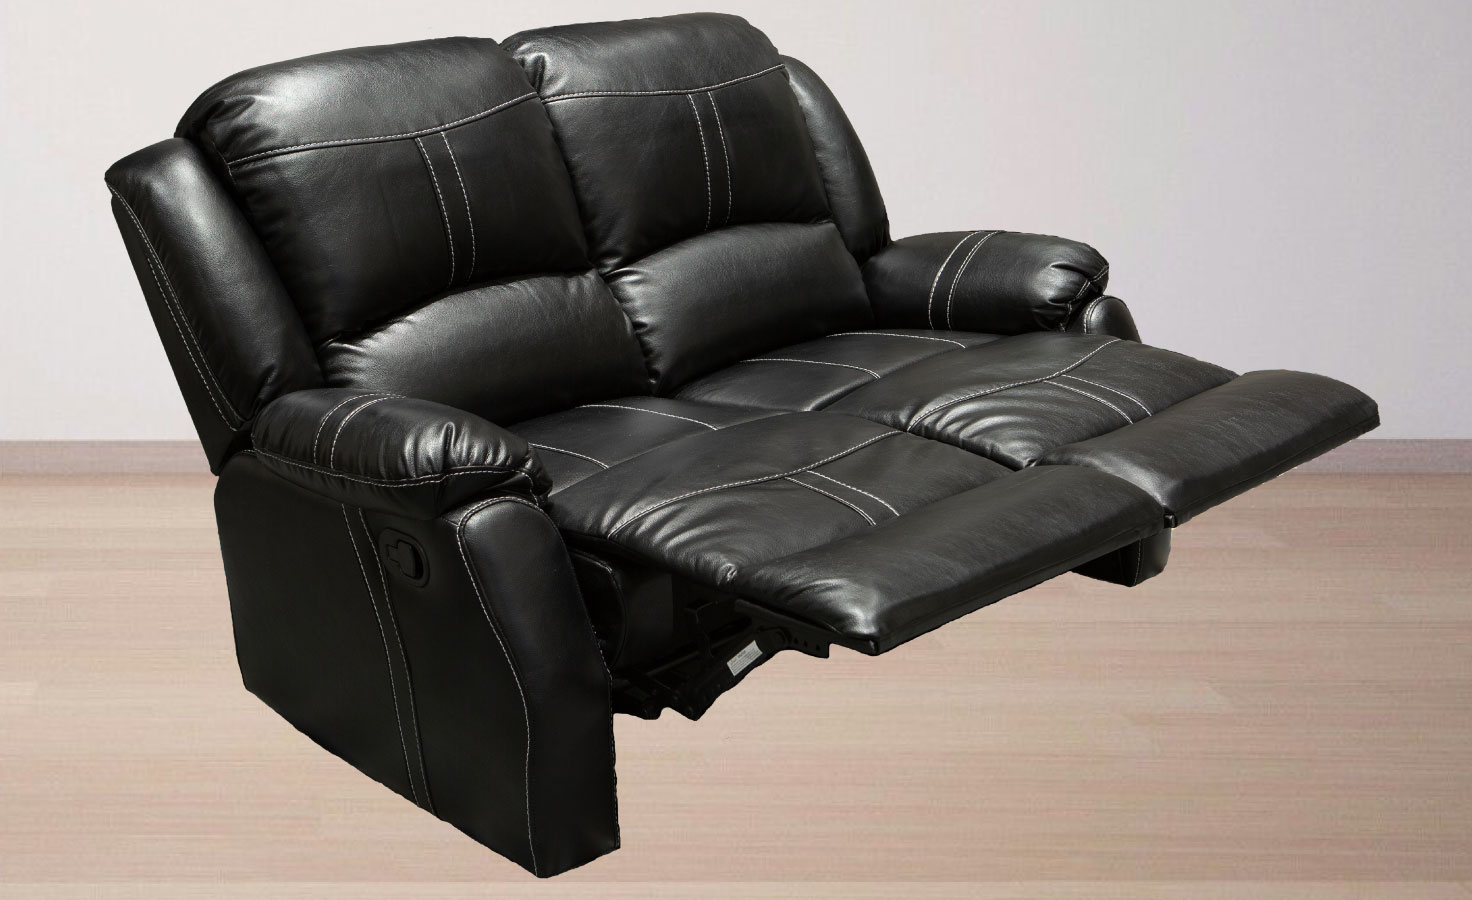 Lorraine BelAire Deluxe Ebony Reclining Loveseat Right Profile Full Recline by American Home Line